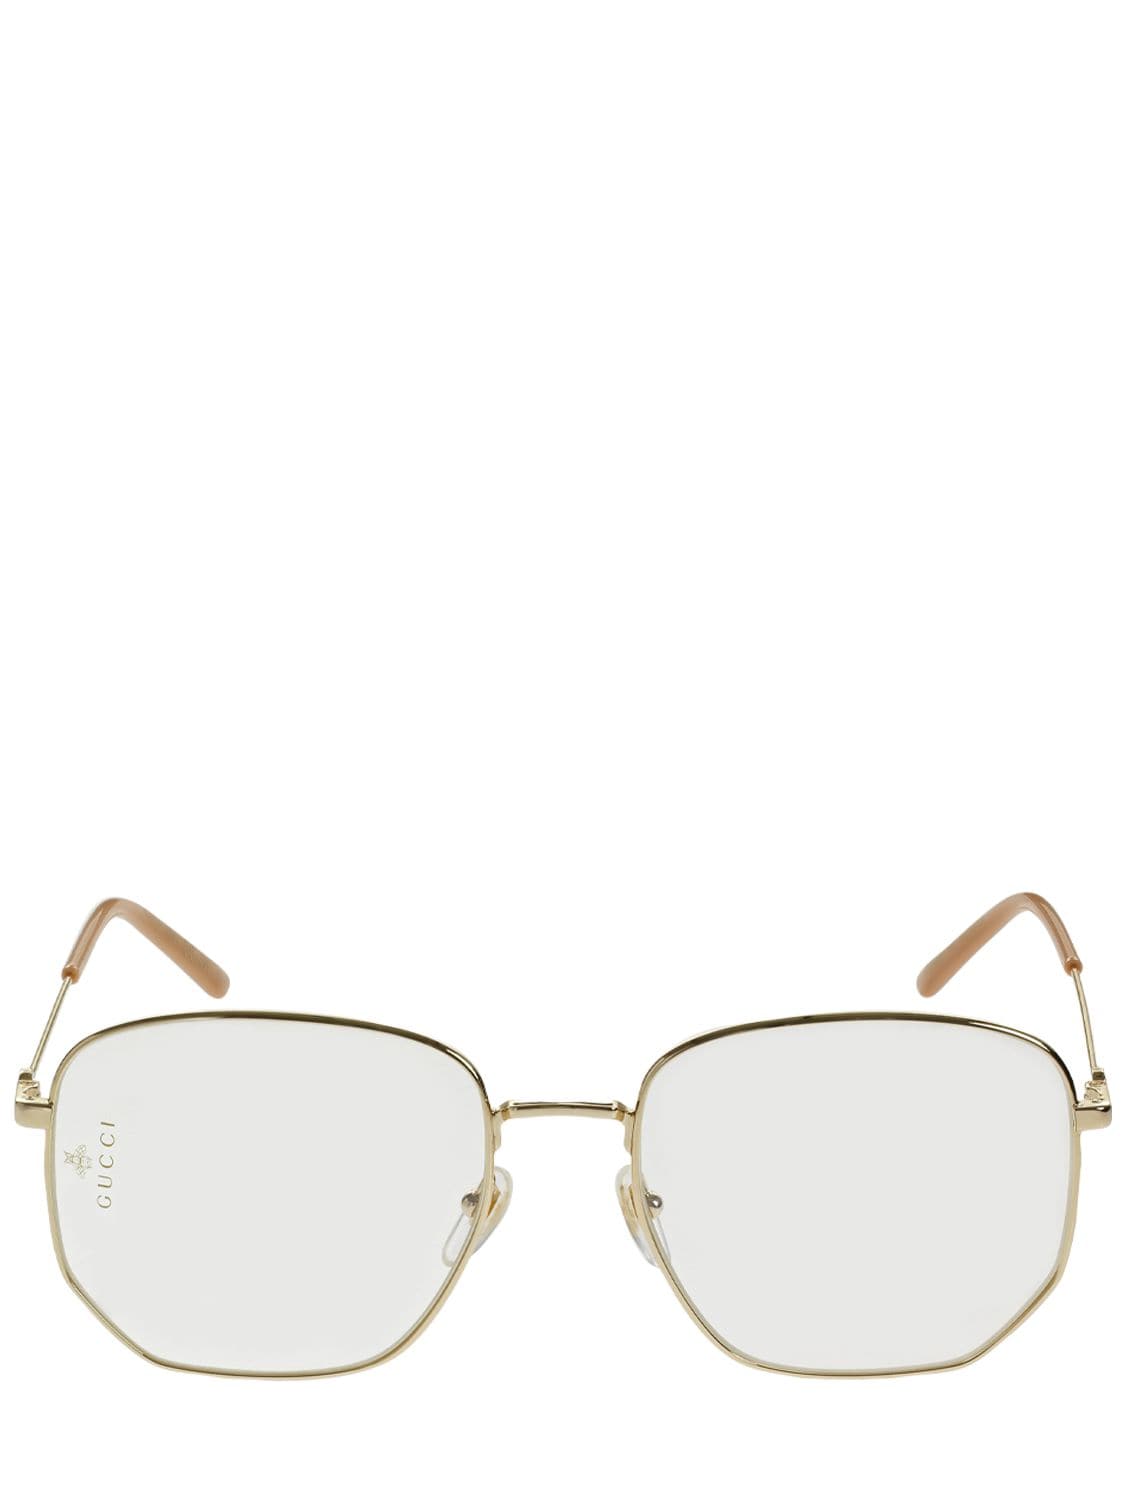 Gucci Gg0396s Squared Metal Eyeglasses In Gold